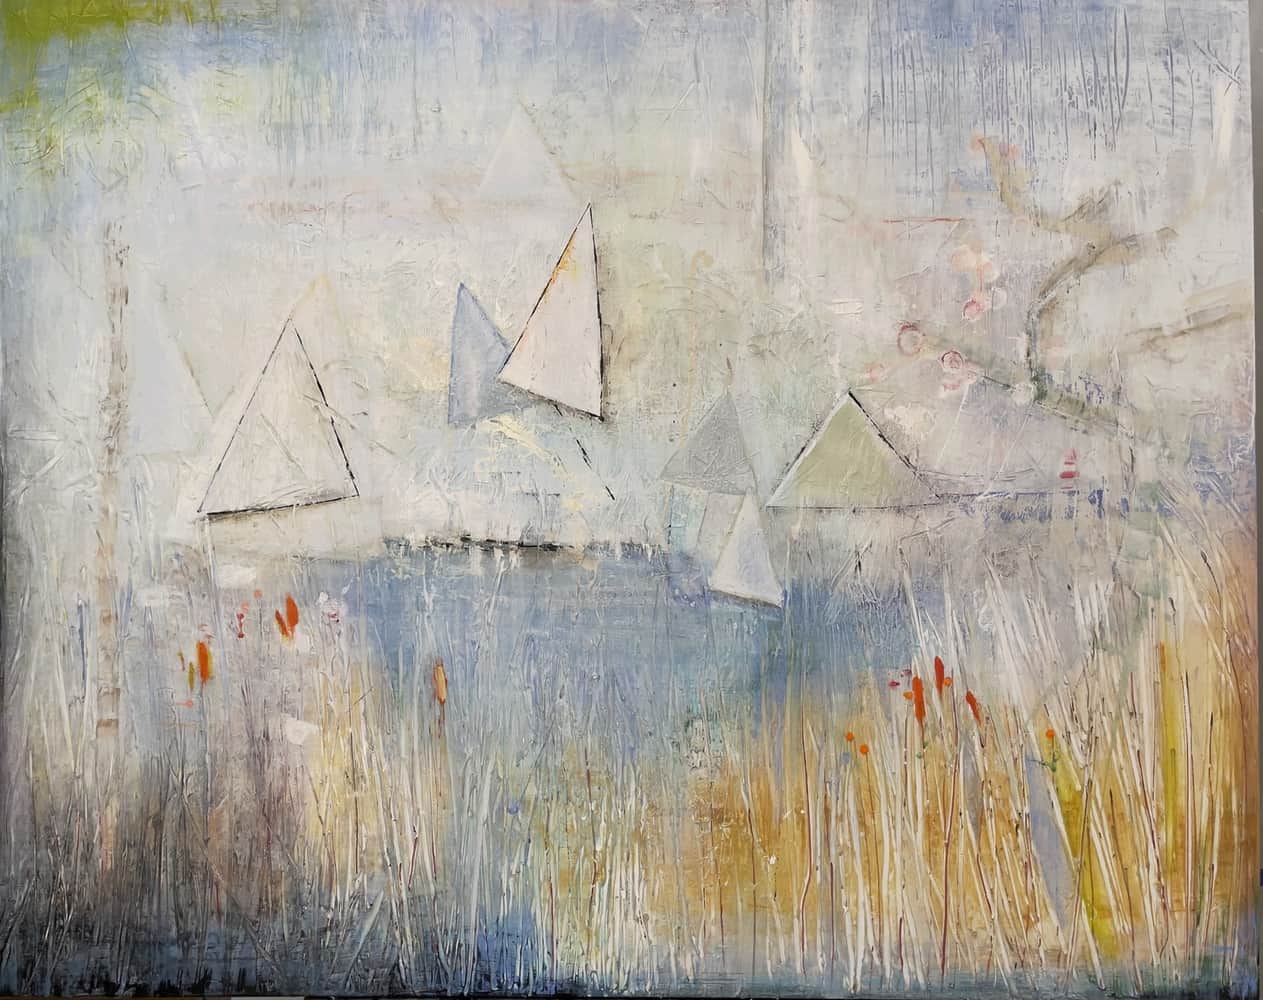 Buy a painting of boats on the lake called Sails.